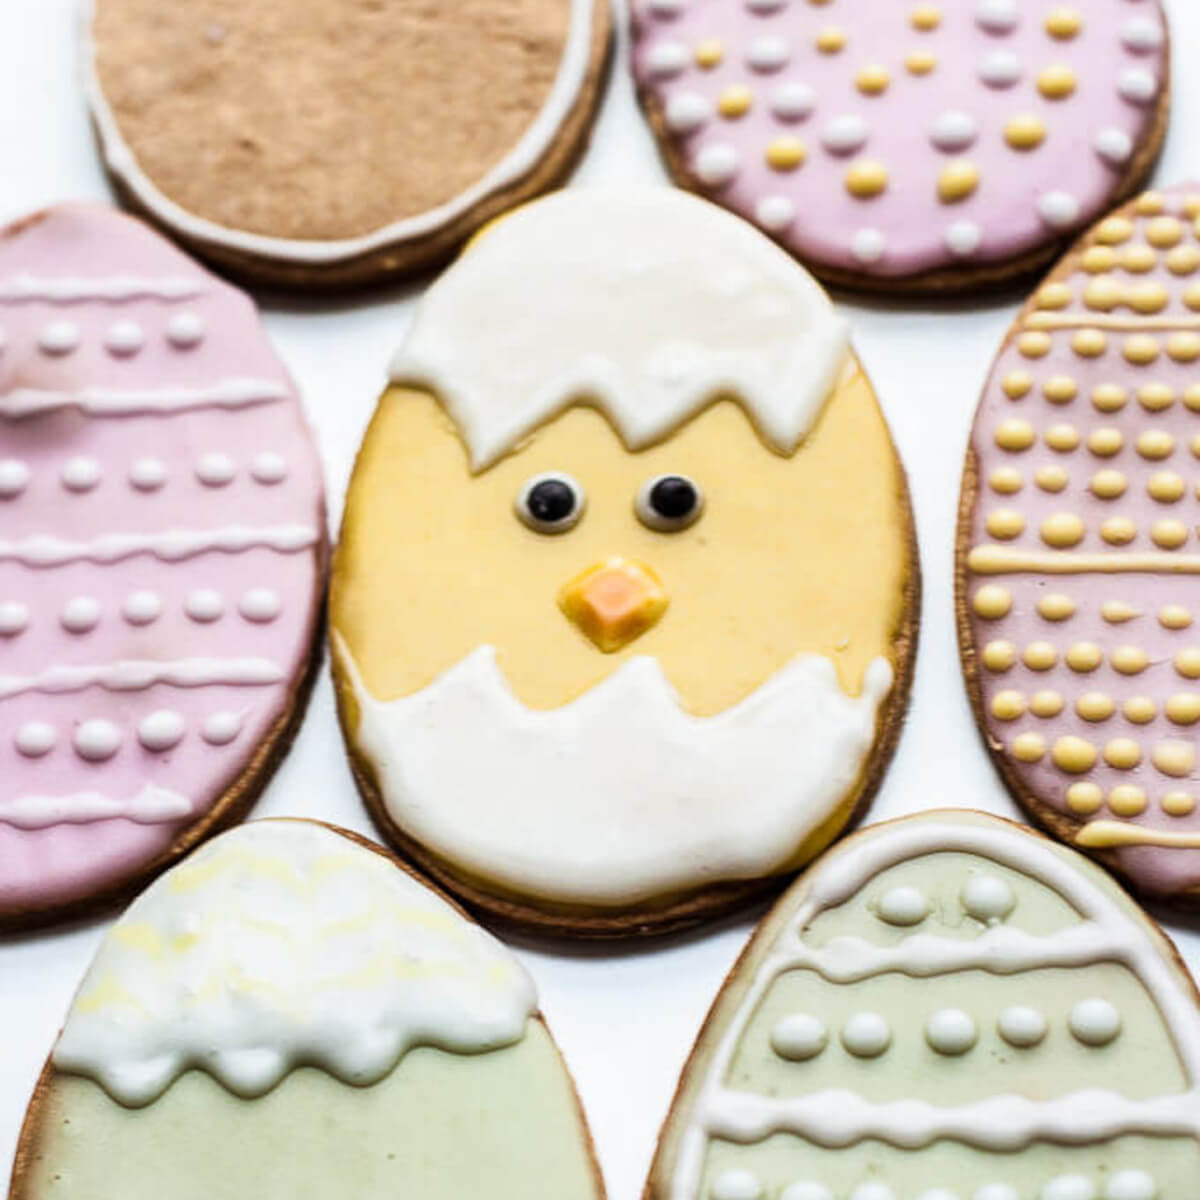 Vegan Easter Cookies Recipe with natural icing frosting